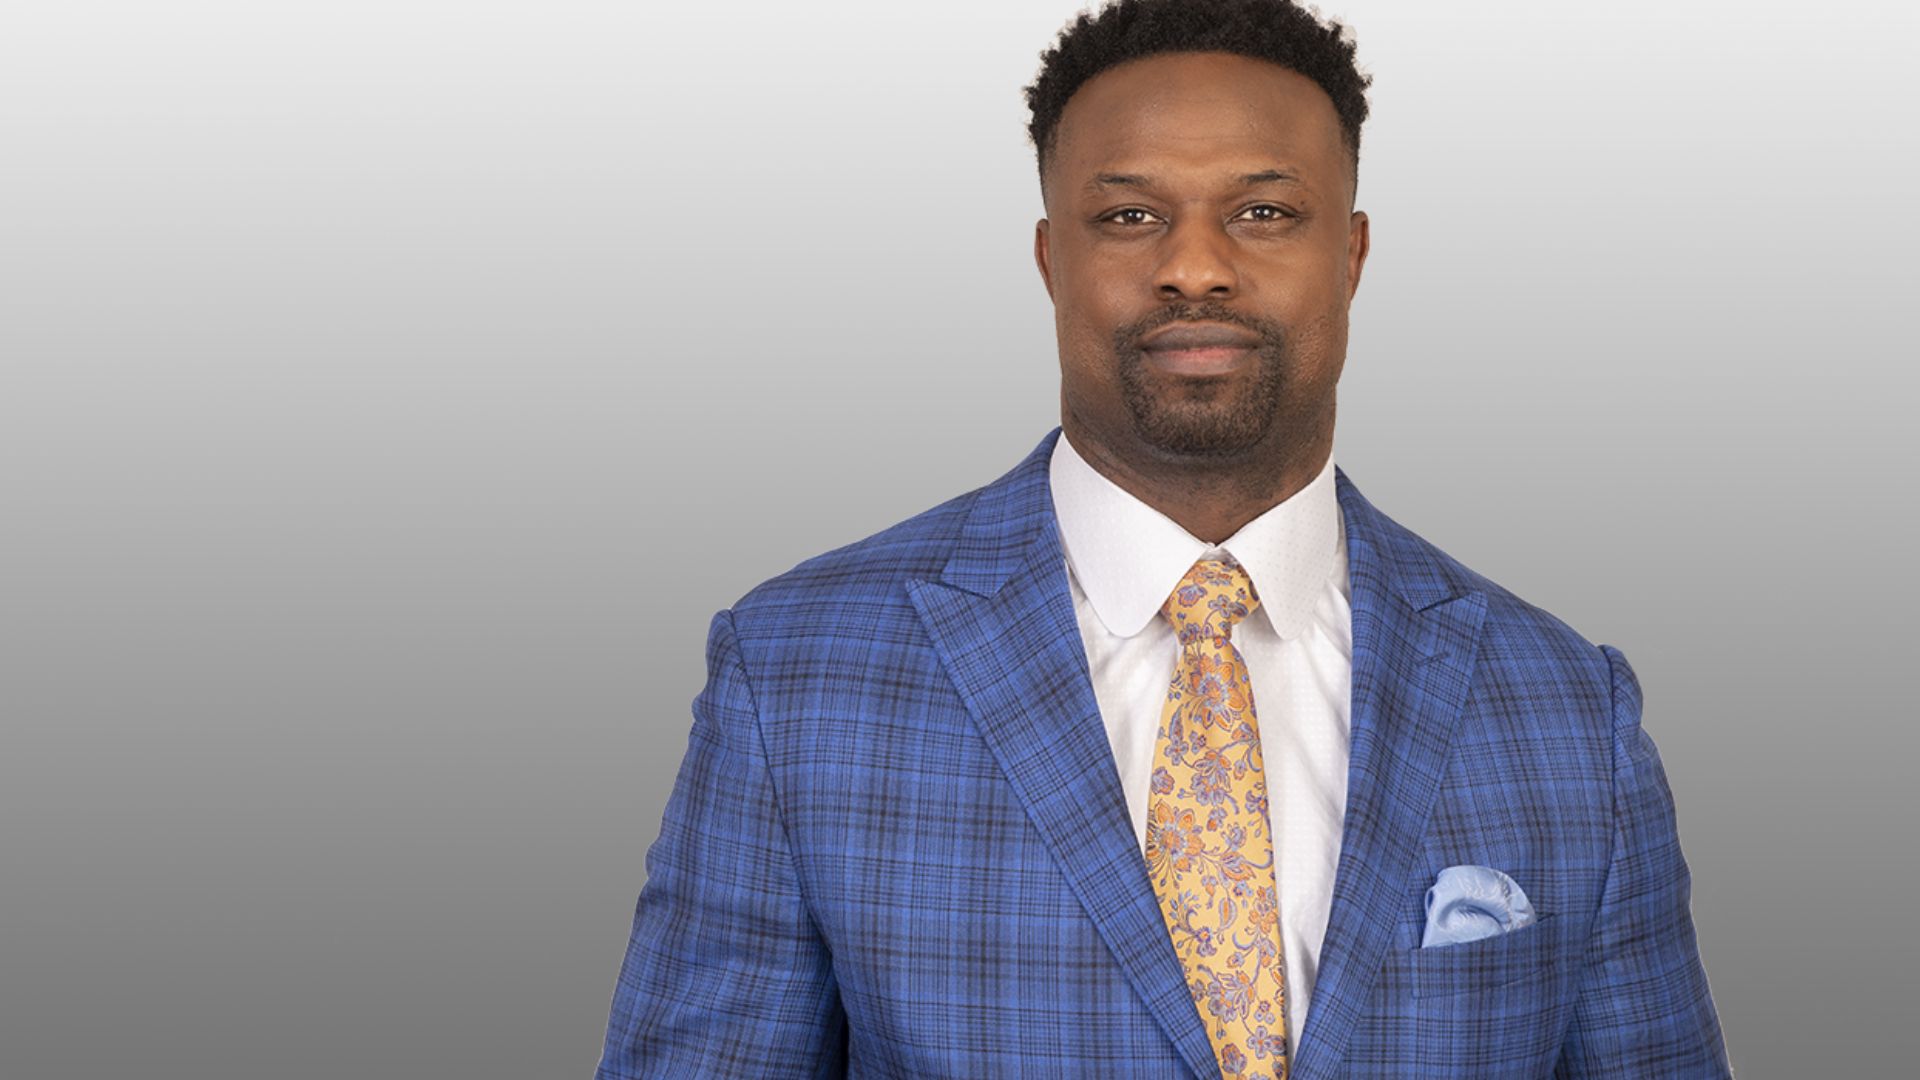 Bart Scott Net Worth - An American Sports Analyst And Former Football Player